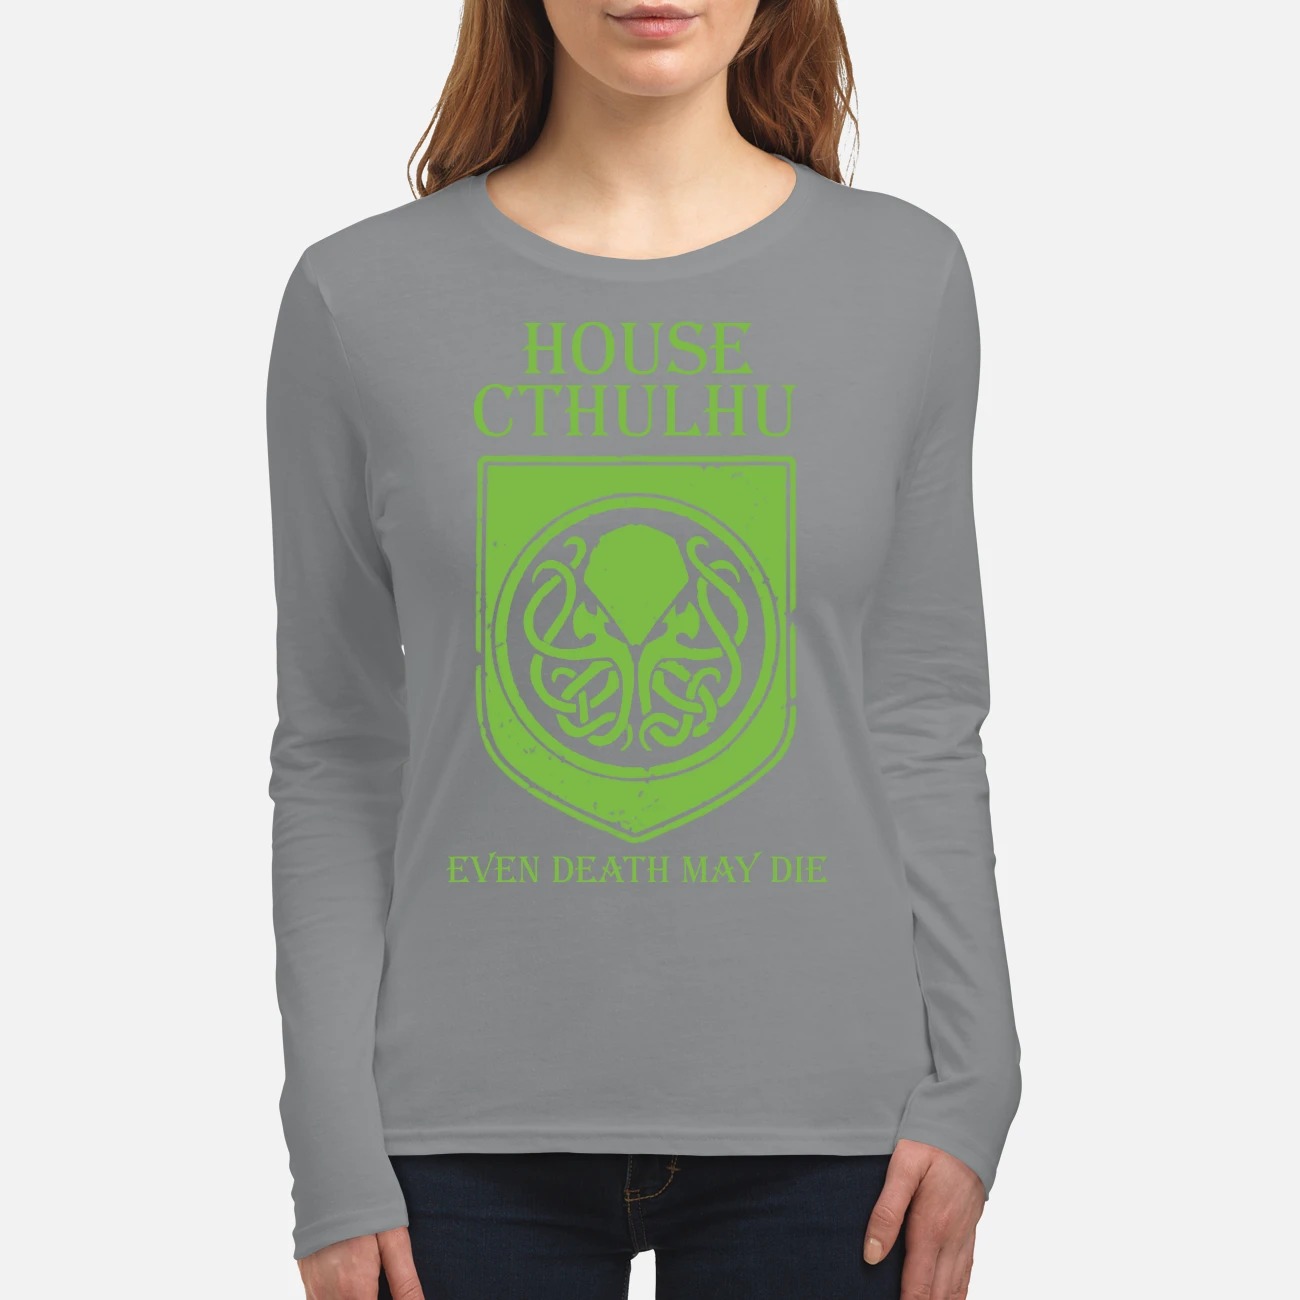 House cthulhu even death may die women's long sleeved shirt